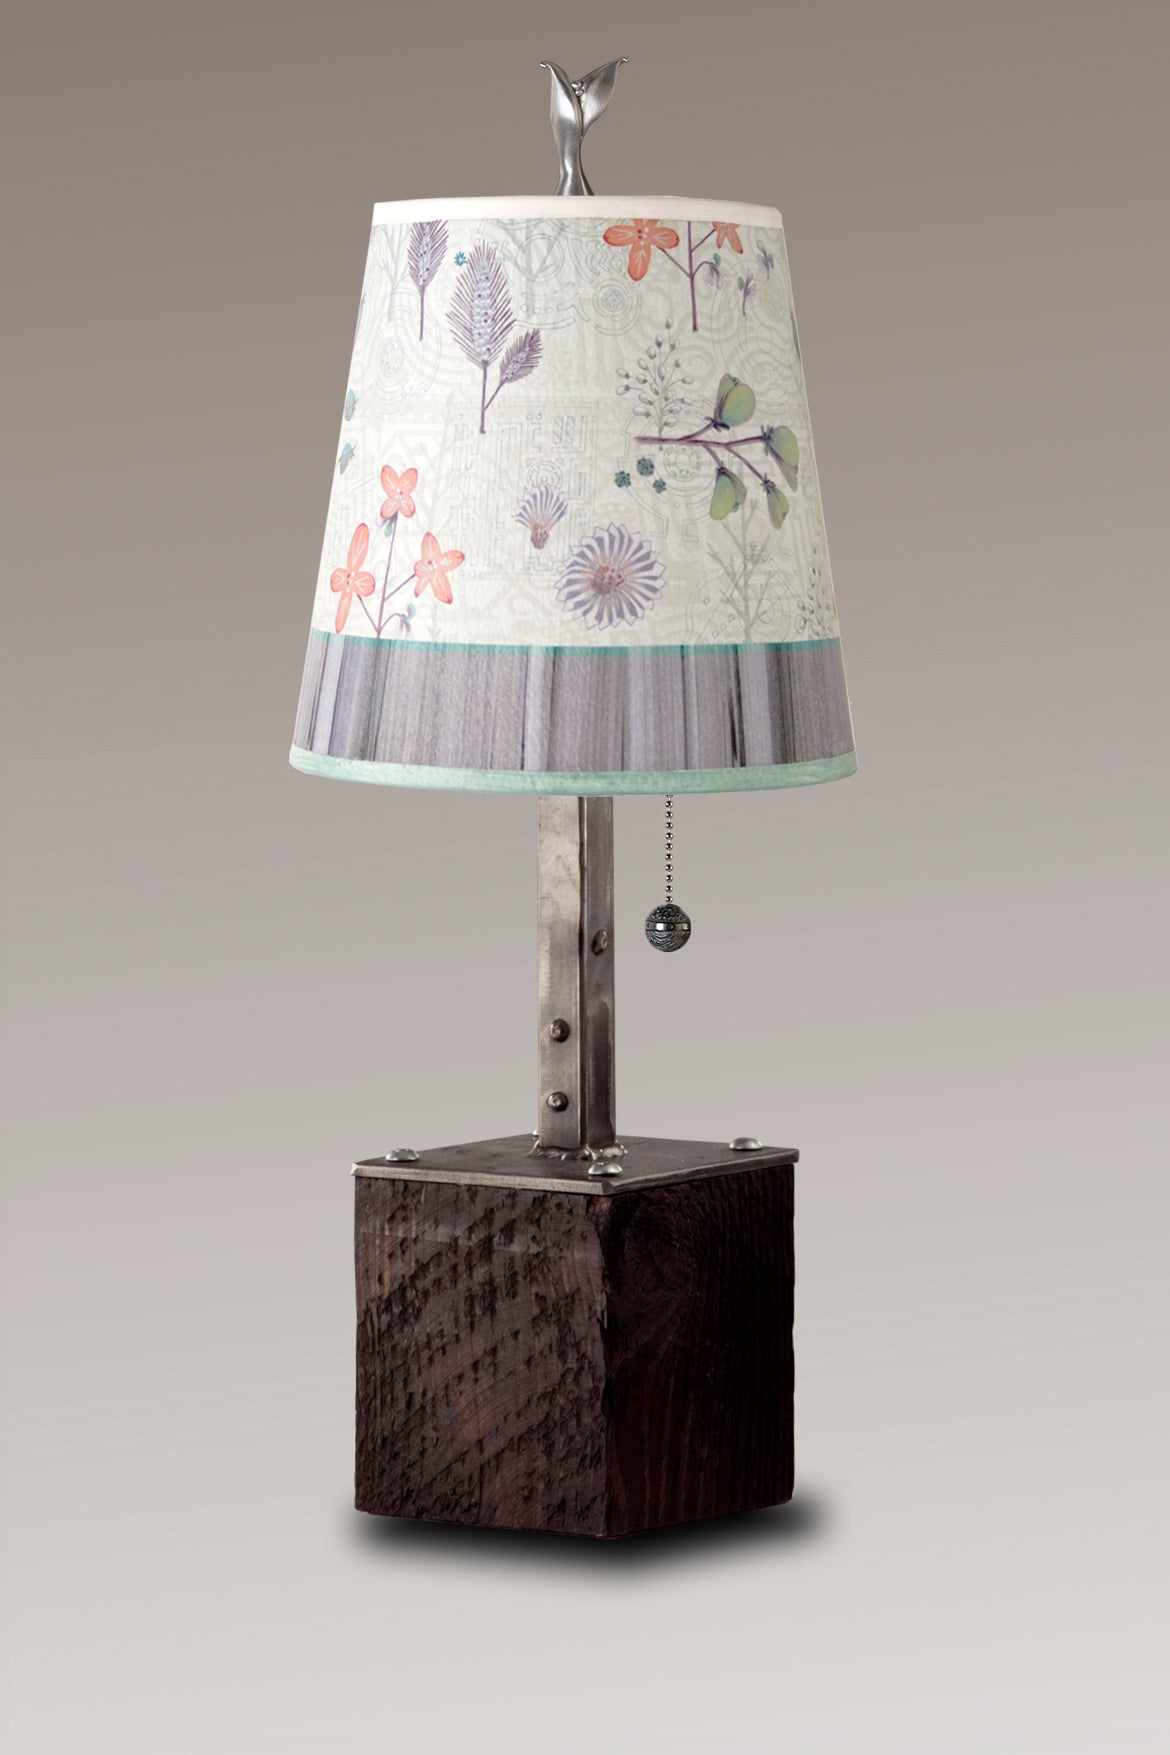 Janna Ugone & Co Table Lamps Steel Table Lamp on Reclaimed Wood with Small Drum Shade in Flora & Maze